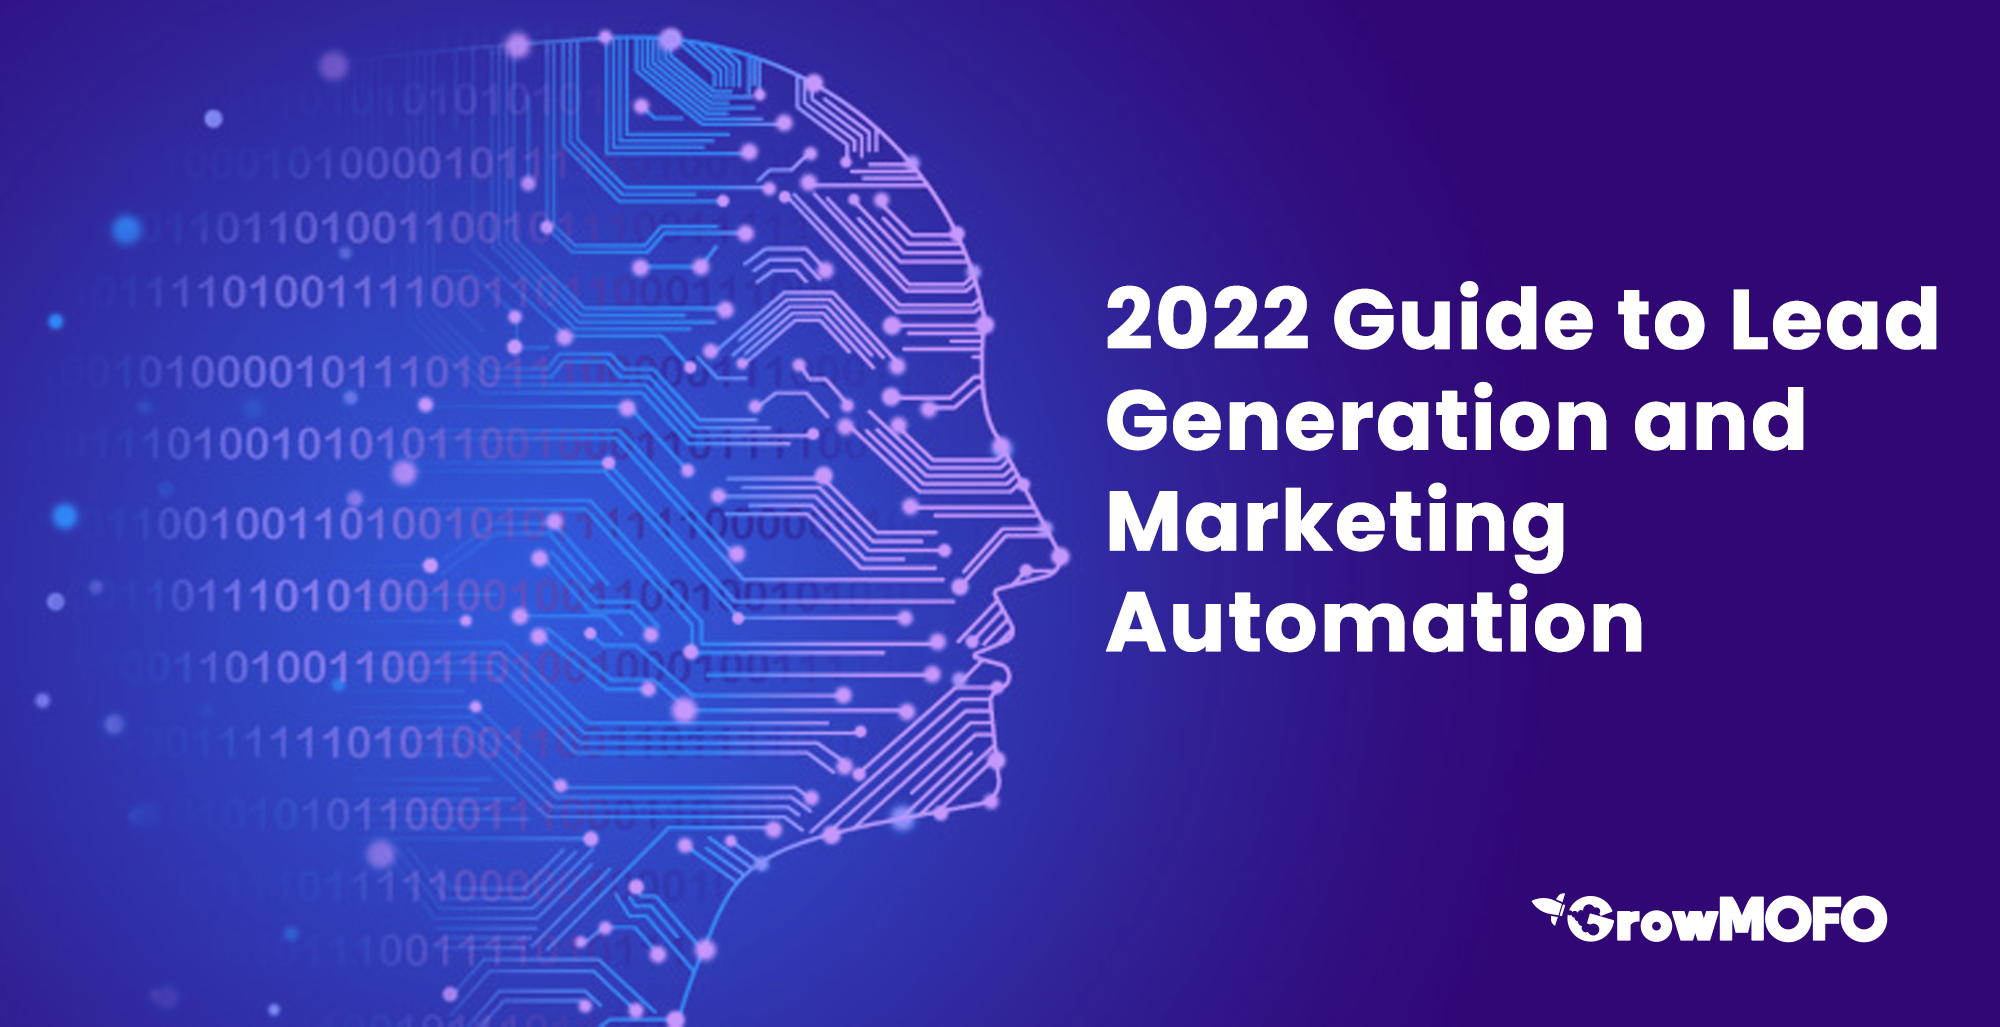 2022 Guide to Lead Generation and Marketing Automation